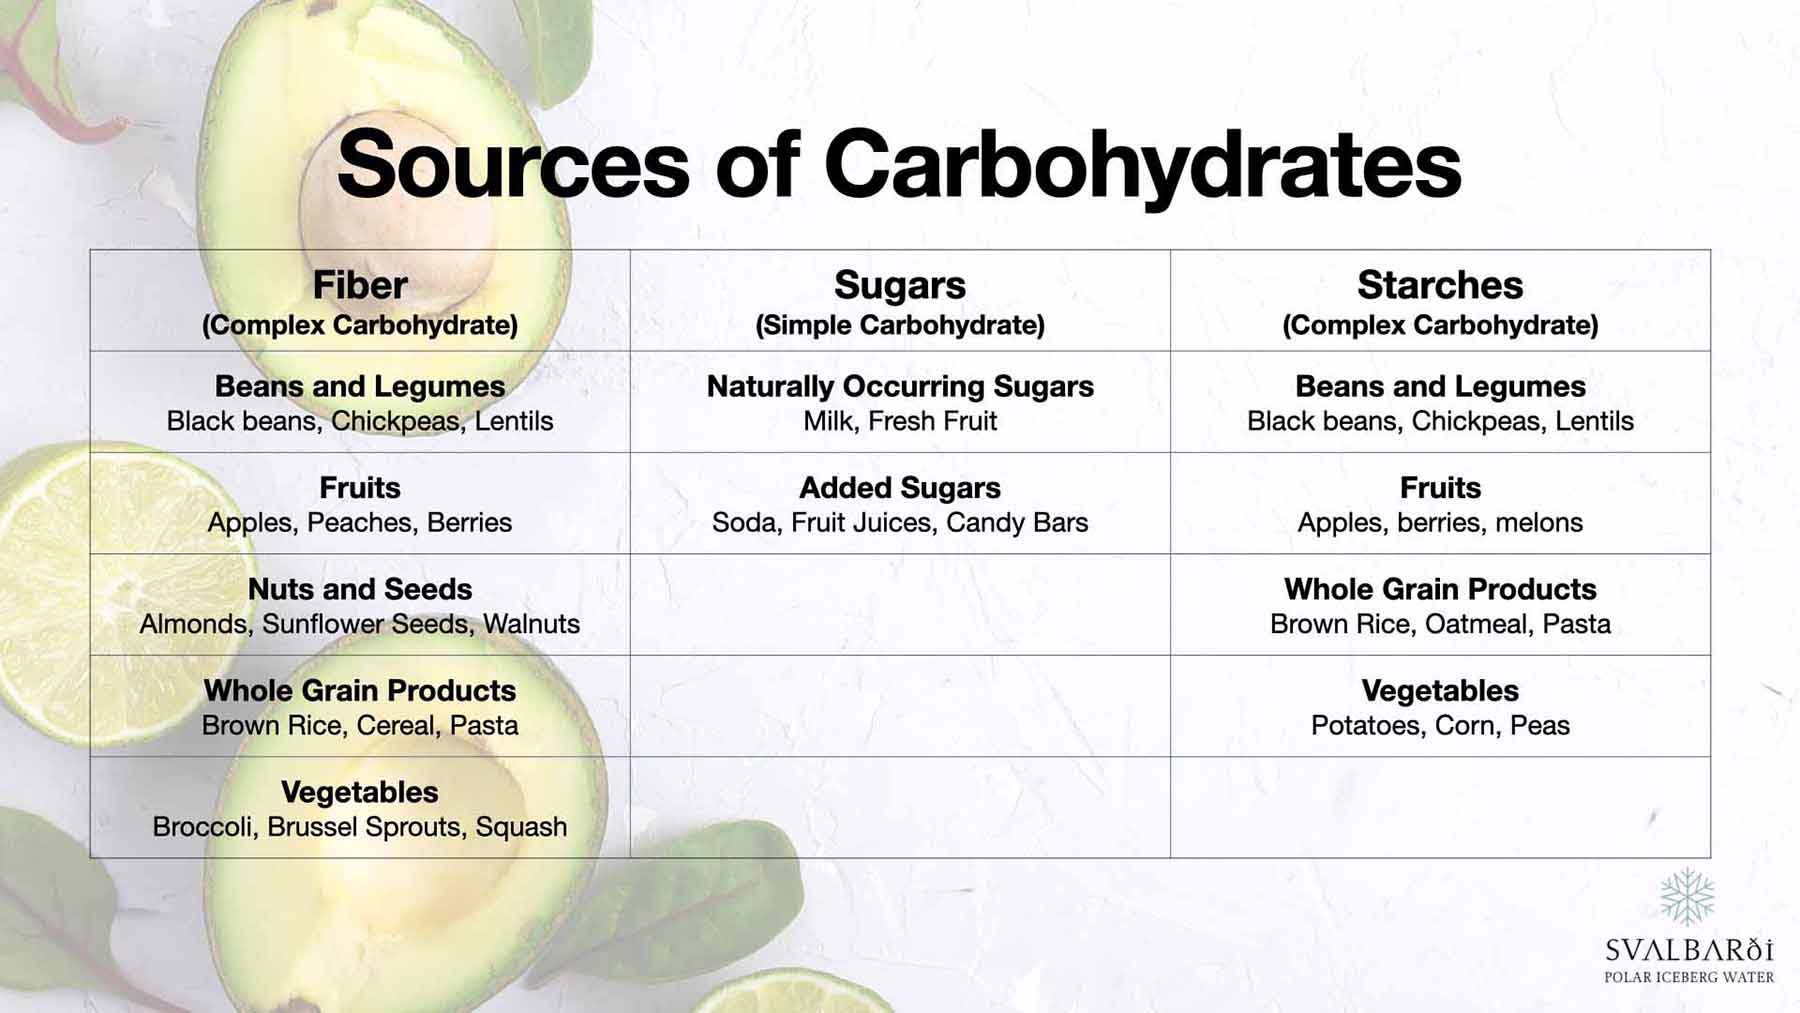 Fiber, Sugar, and Starch Sources of Carbohydrates